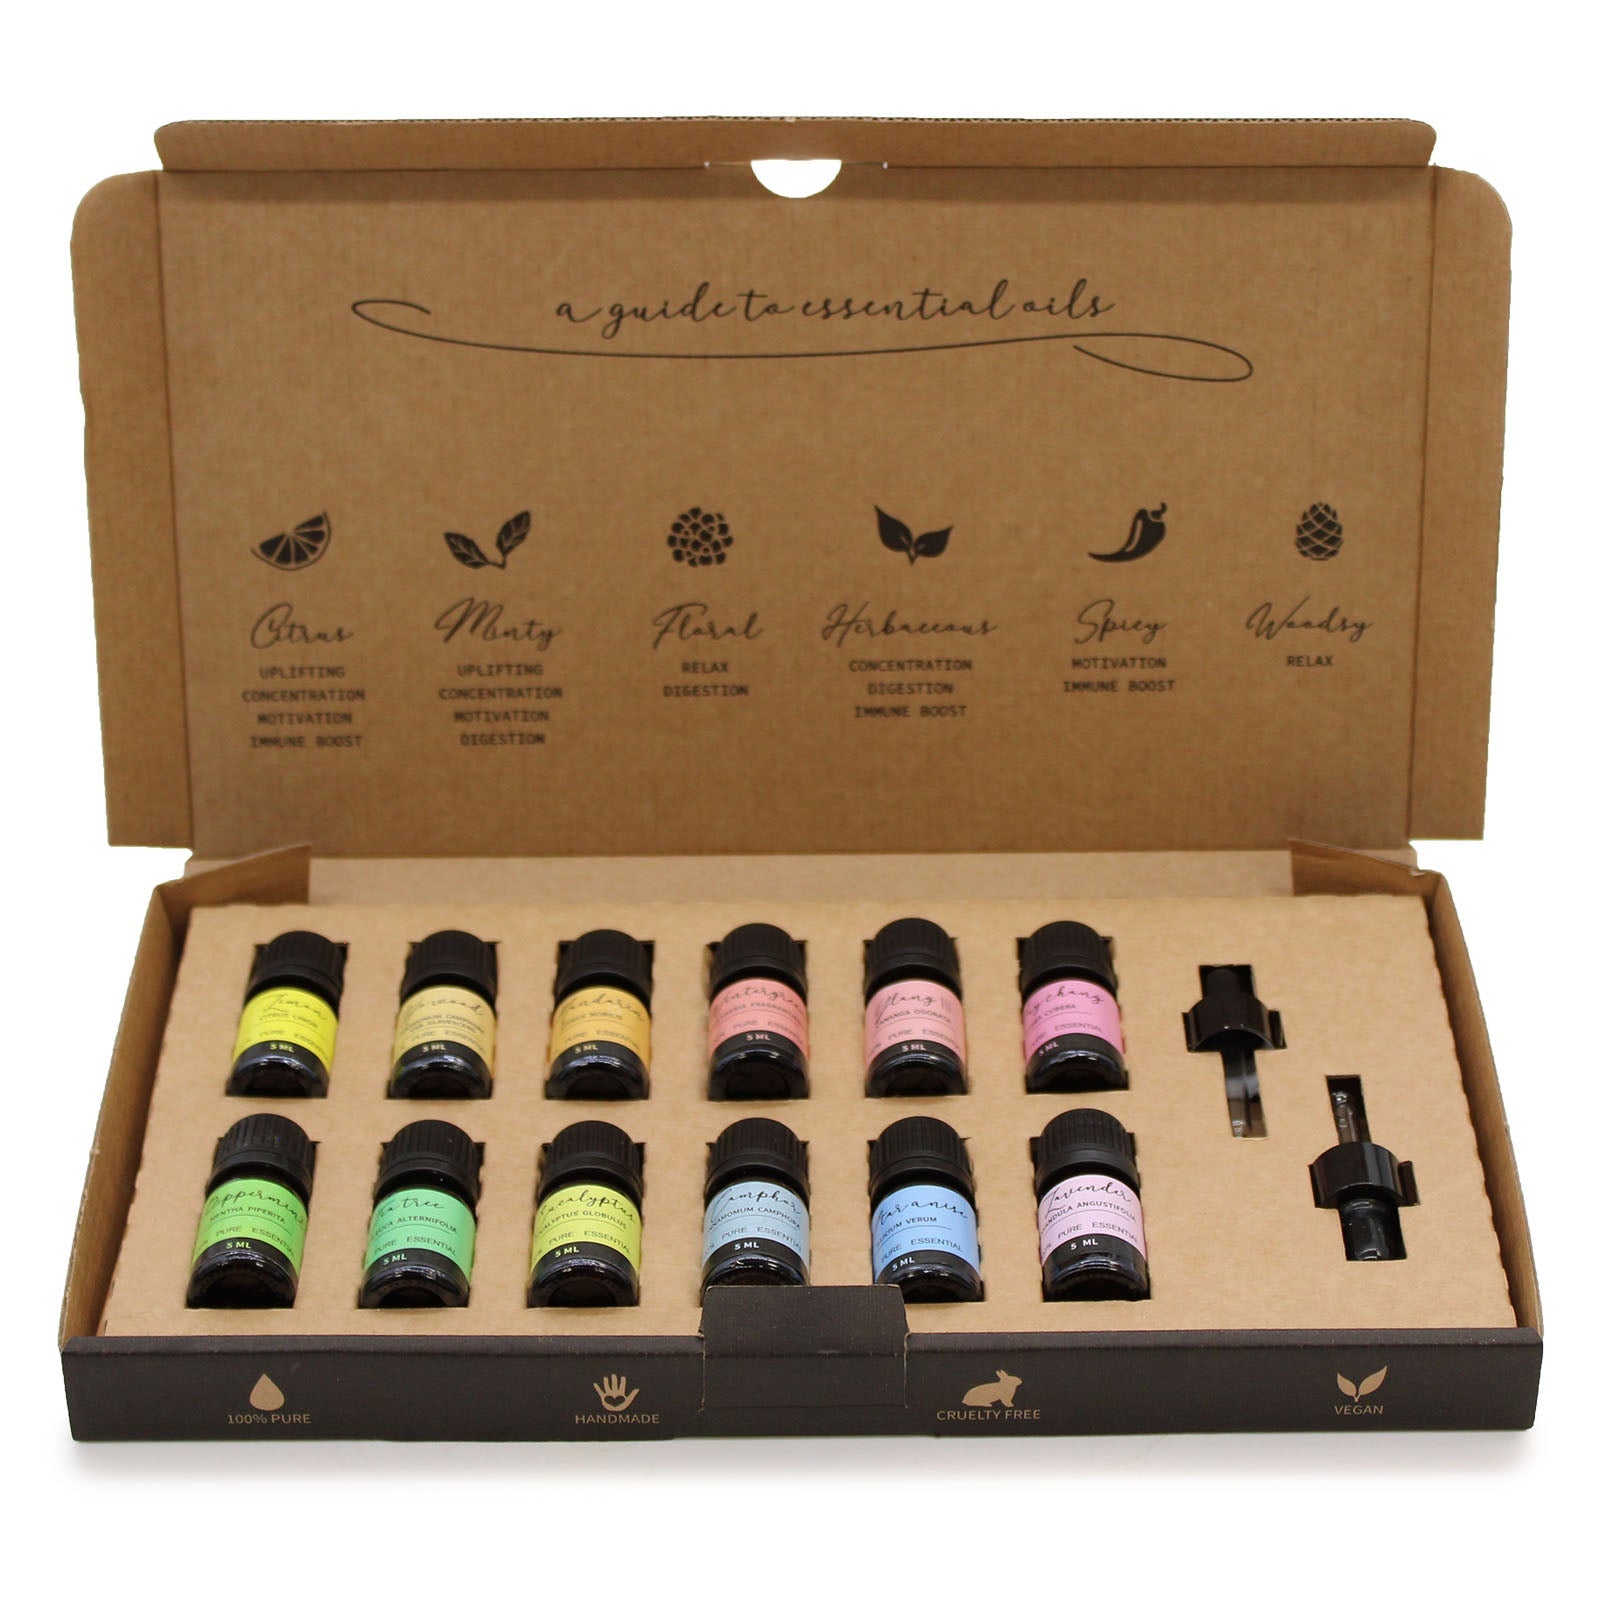 View Aromatherapy Essential Oil Set Starter Pack information